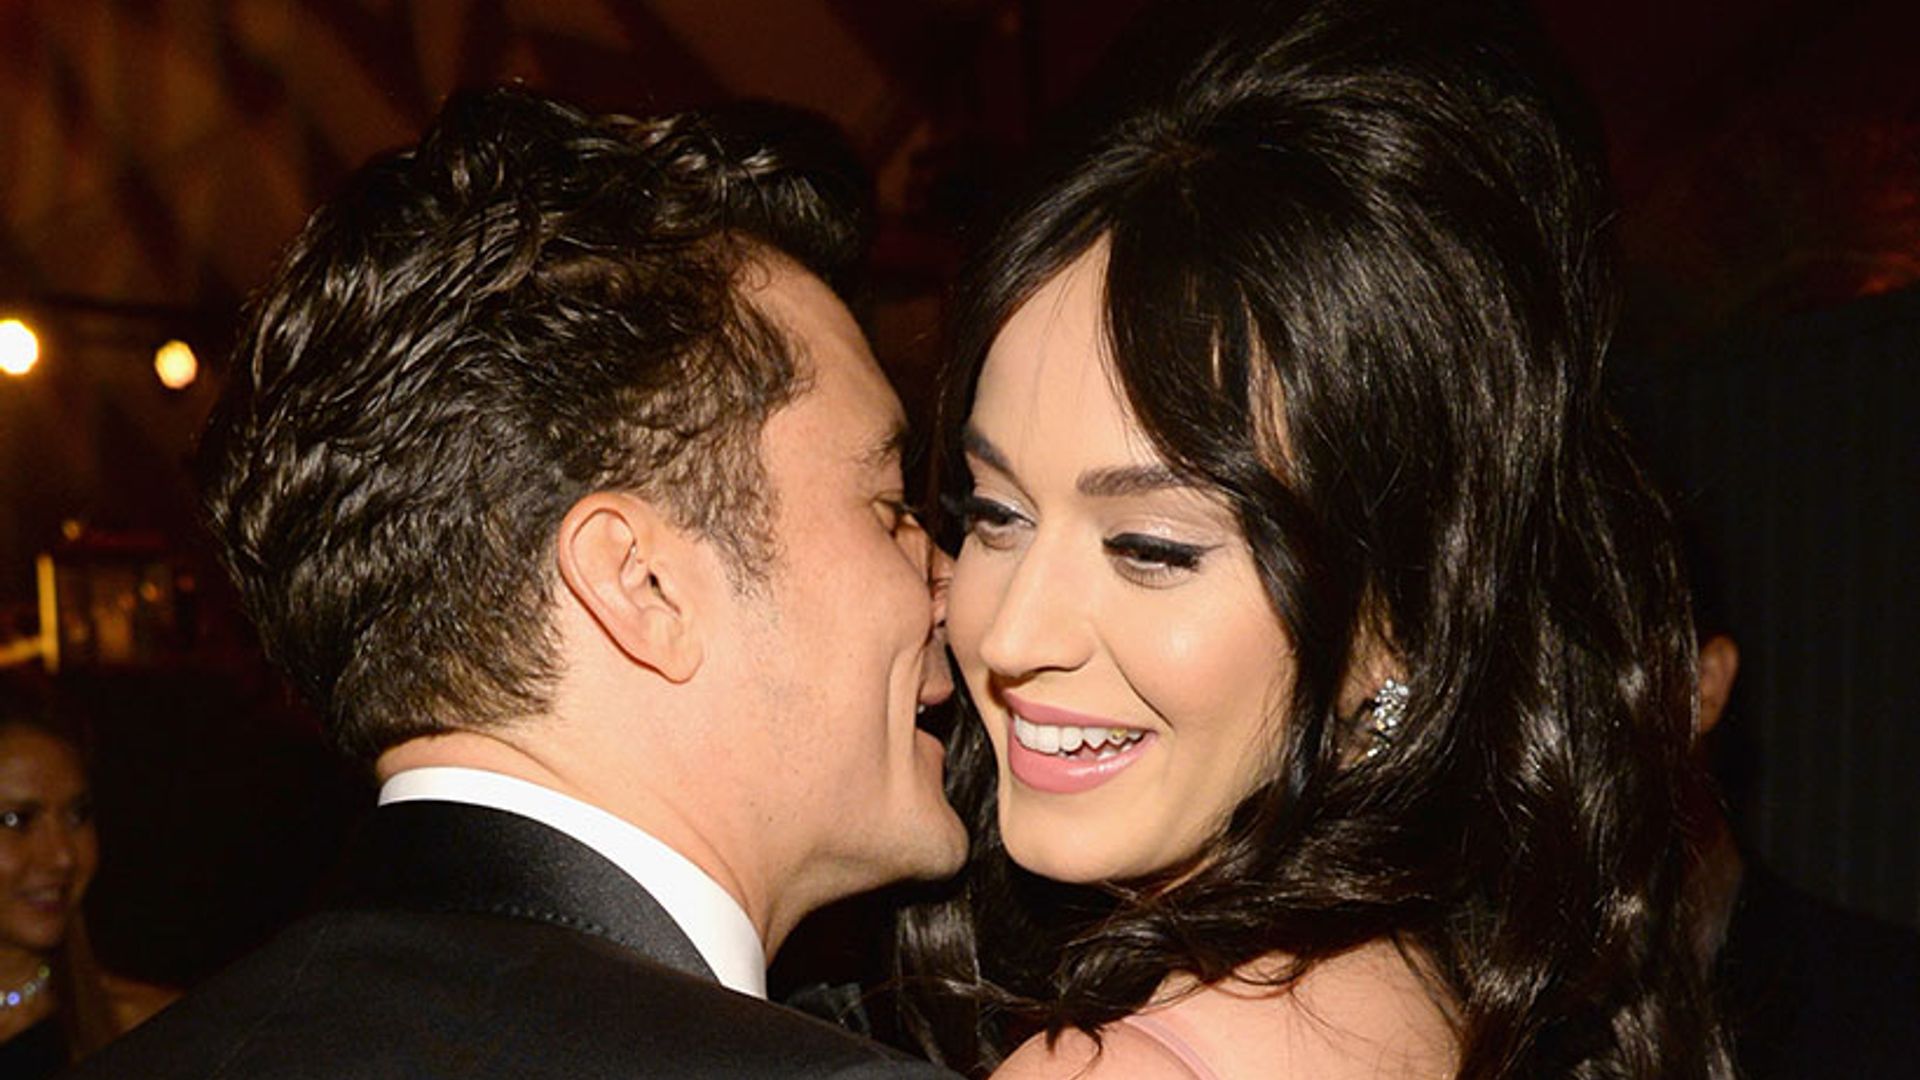 Katy Perry and Orlando Bloom have split - details